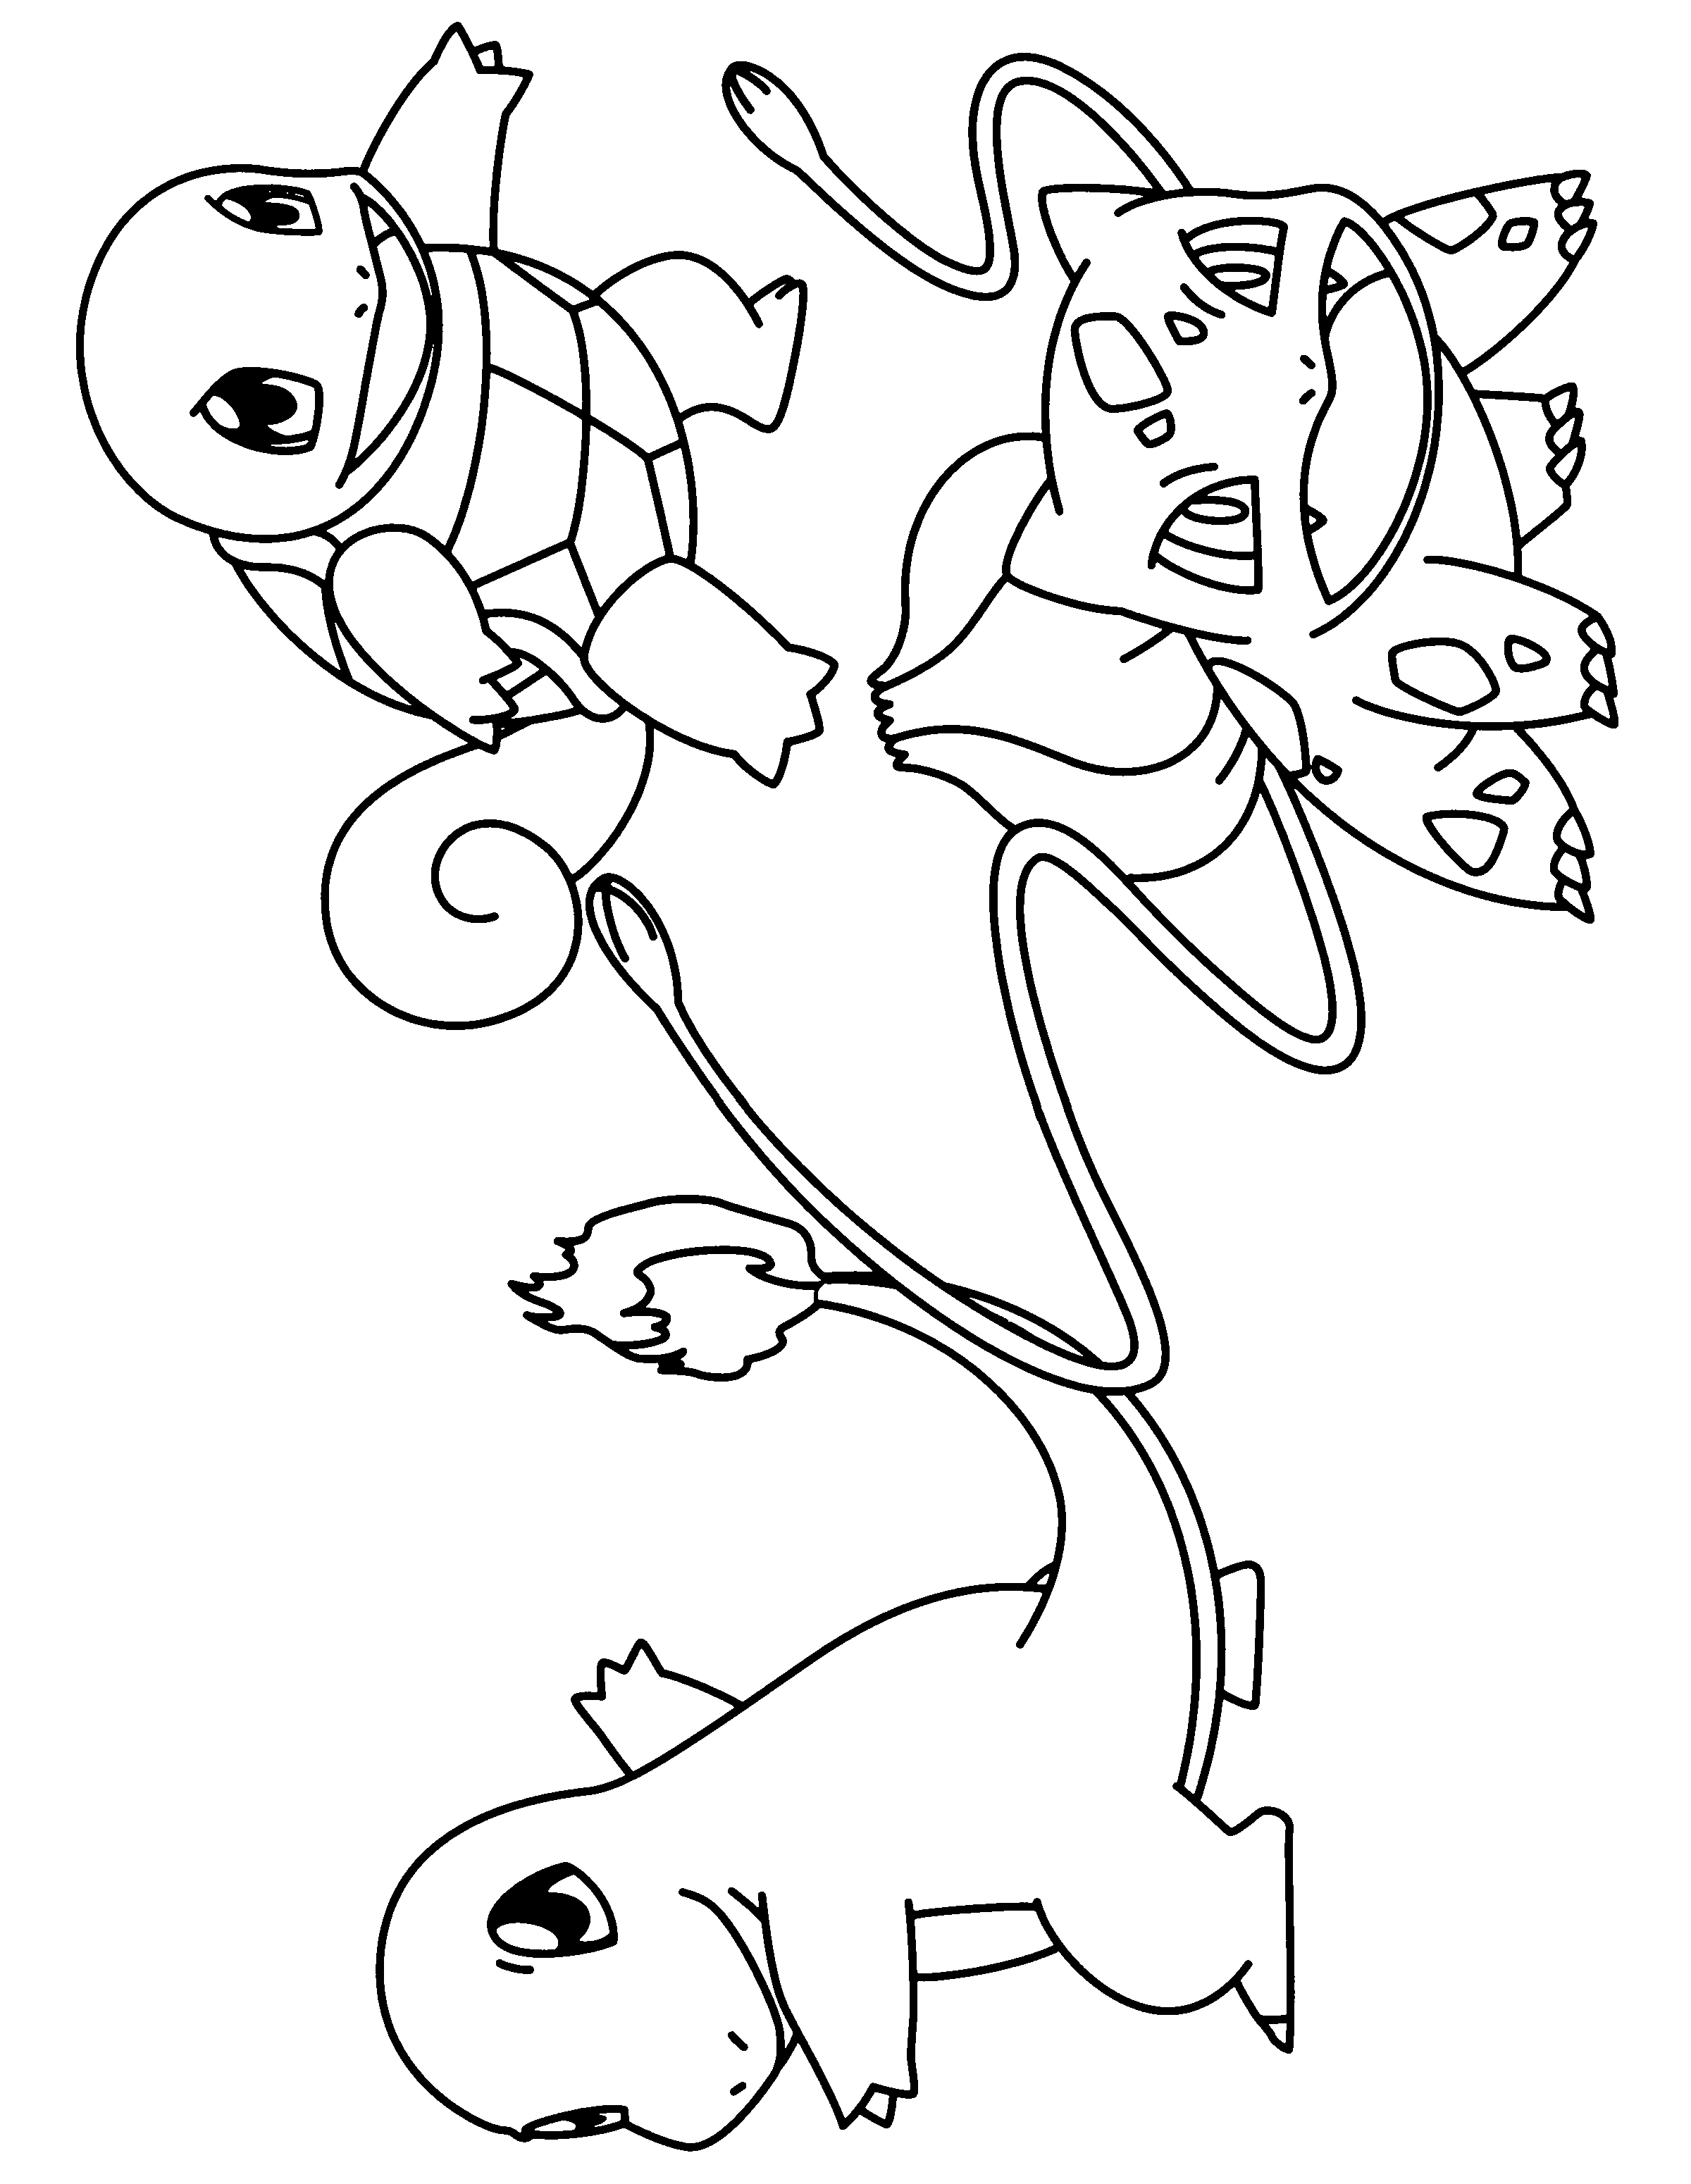 Pikachu Libre Coloring Page Bulbasaur Coloring Page Modest Pokemon Pages Images Best Free